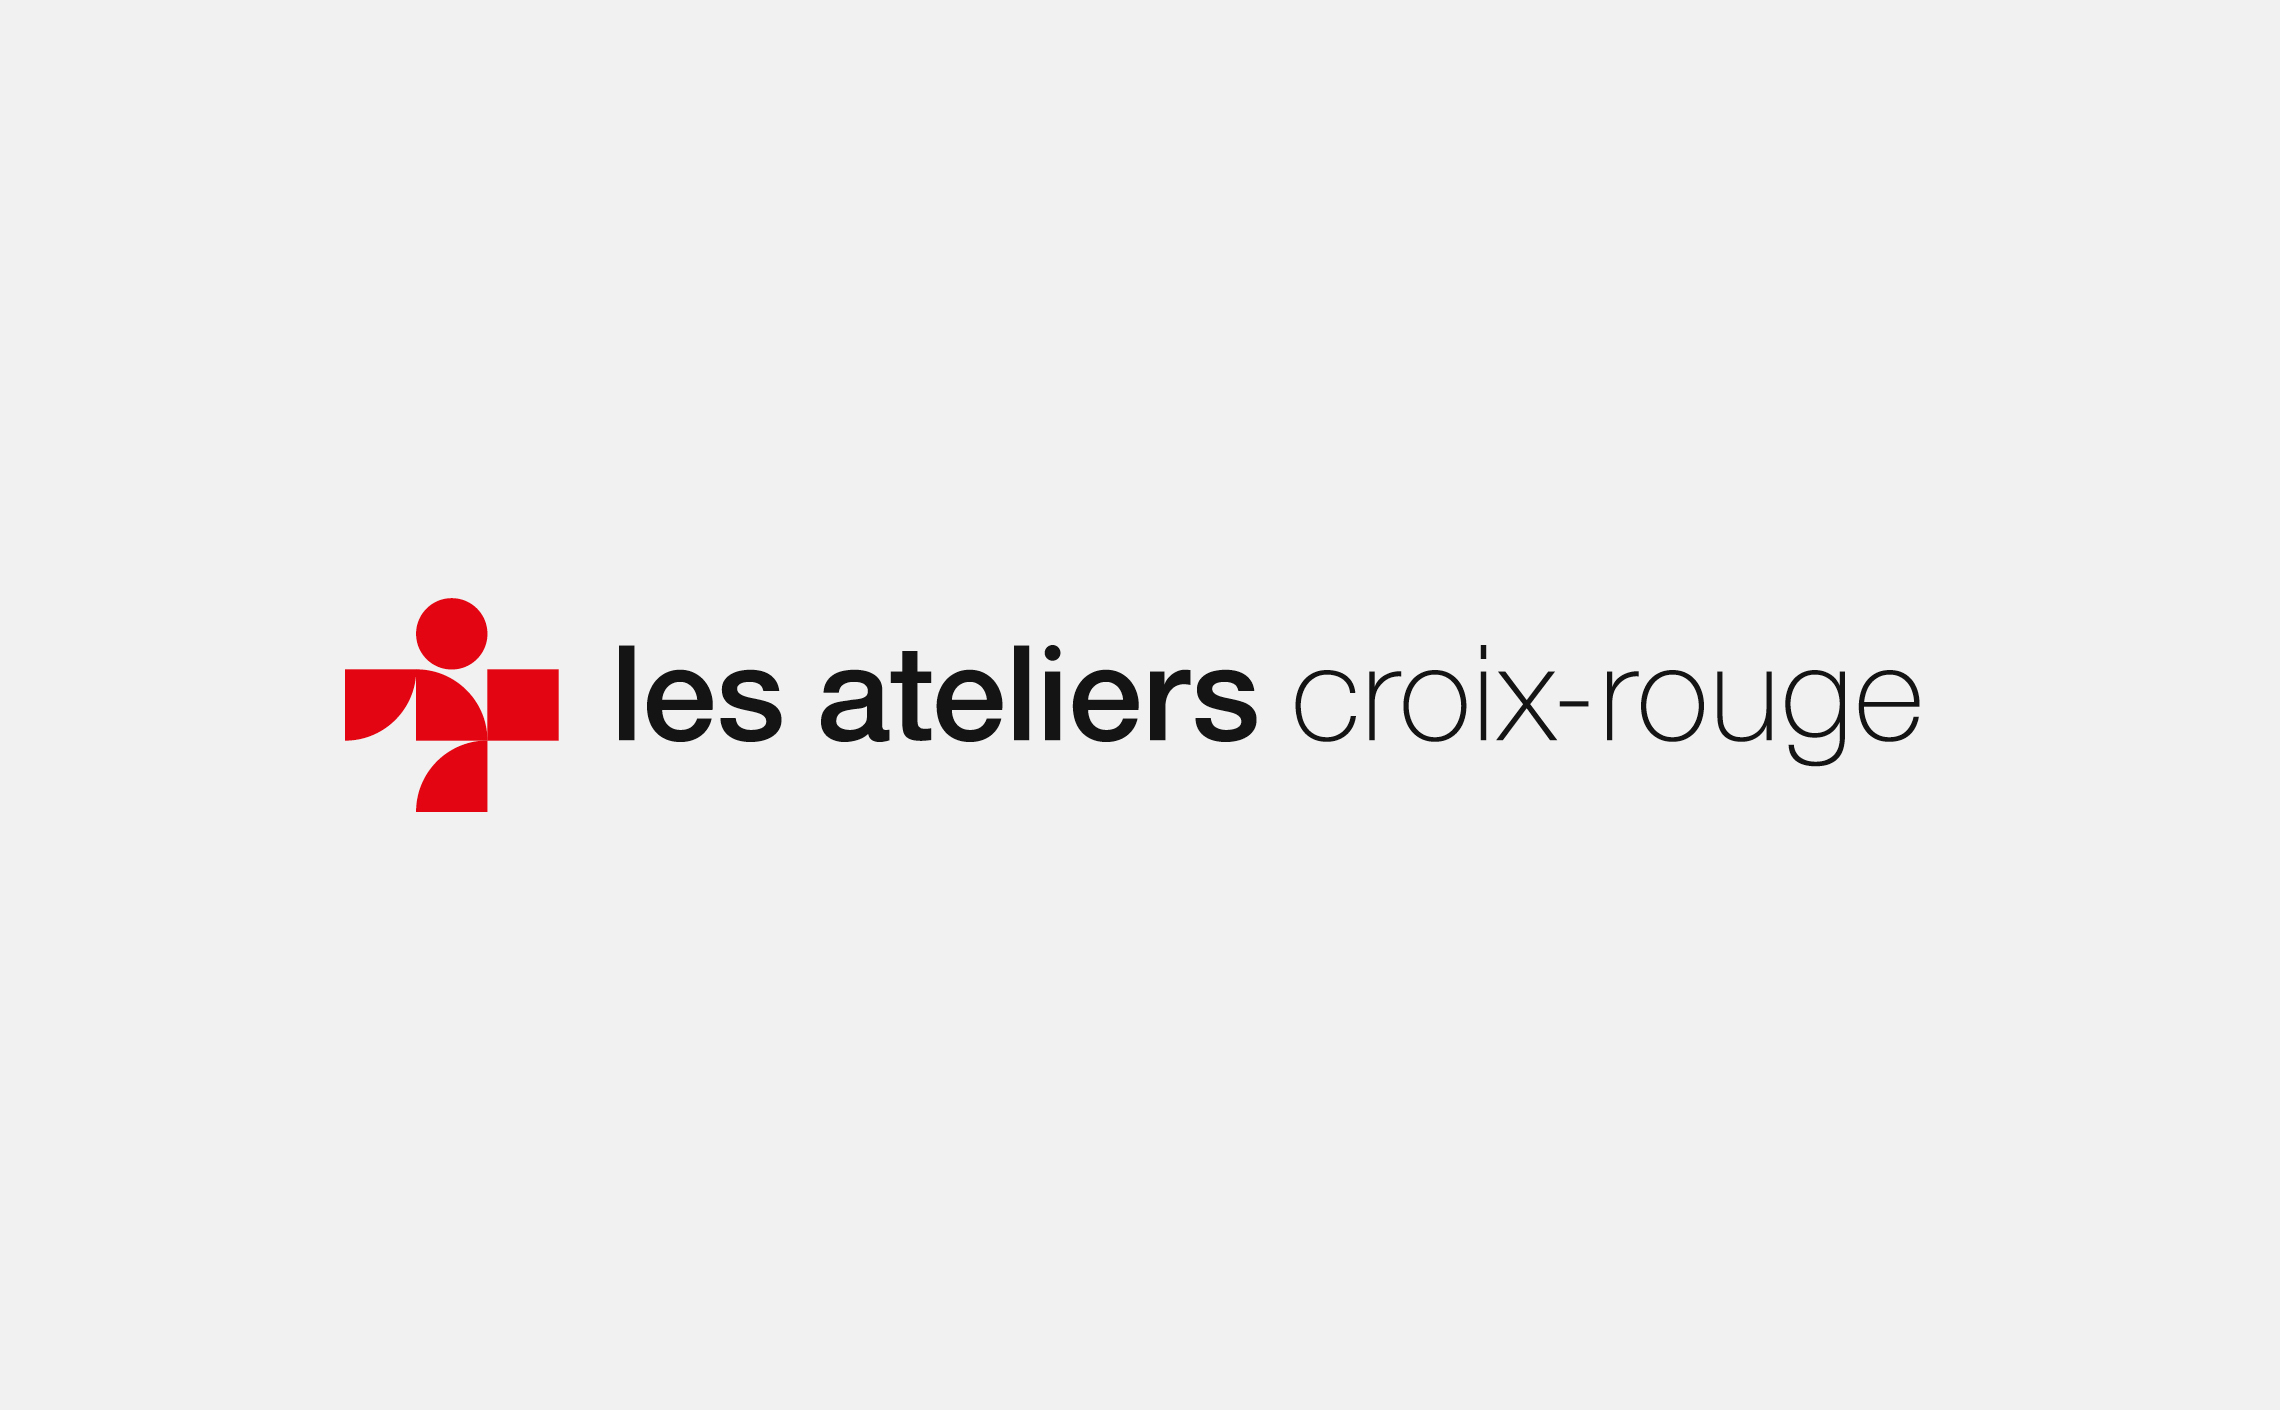 branding croix-rouge insertion ONG ESS